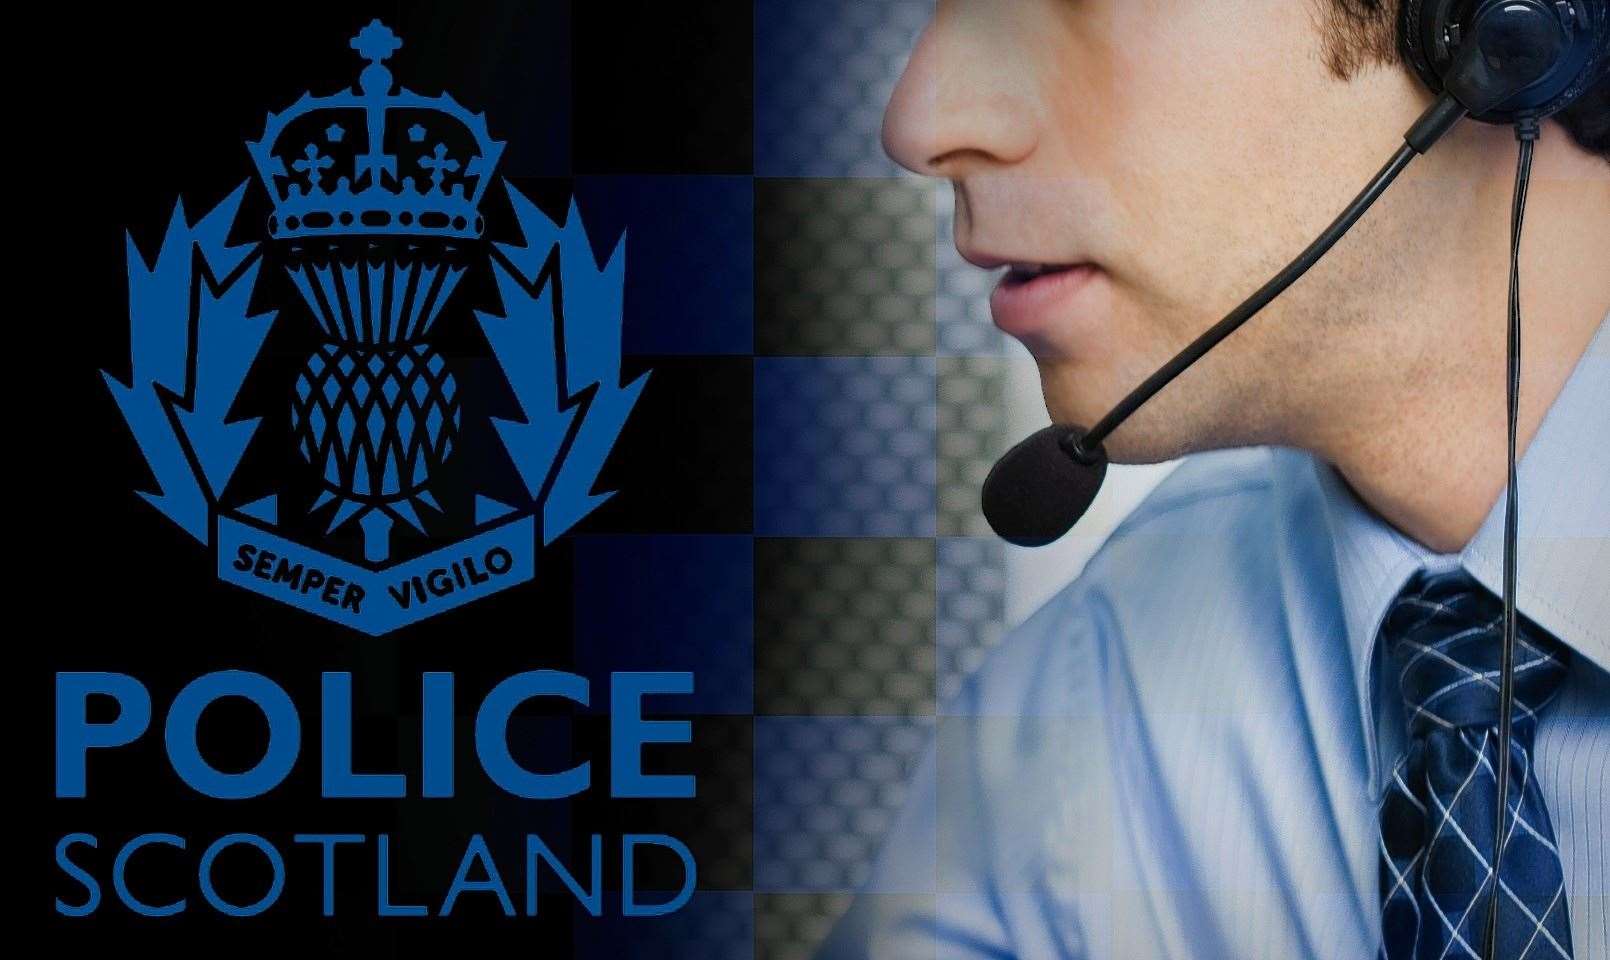 Police Scotland said the man died in hospital after becoming unwell